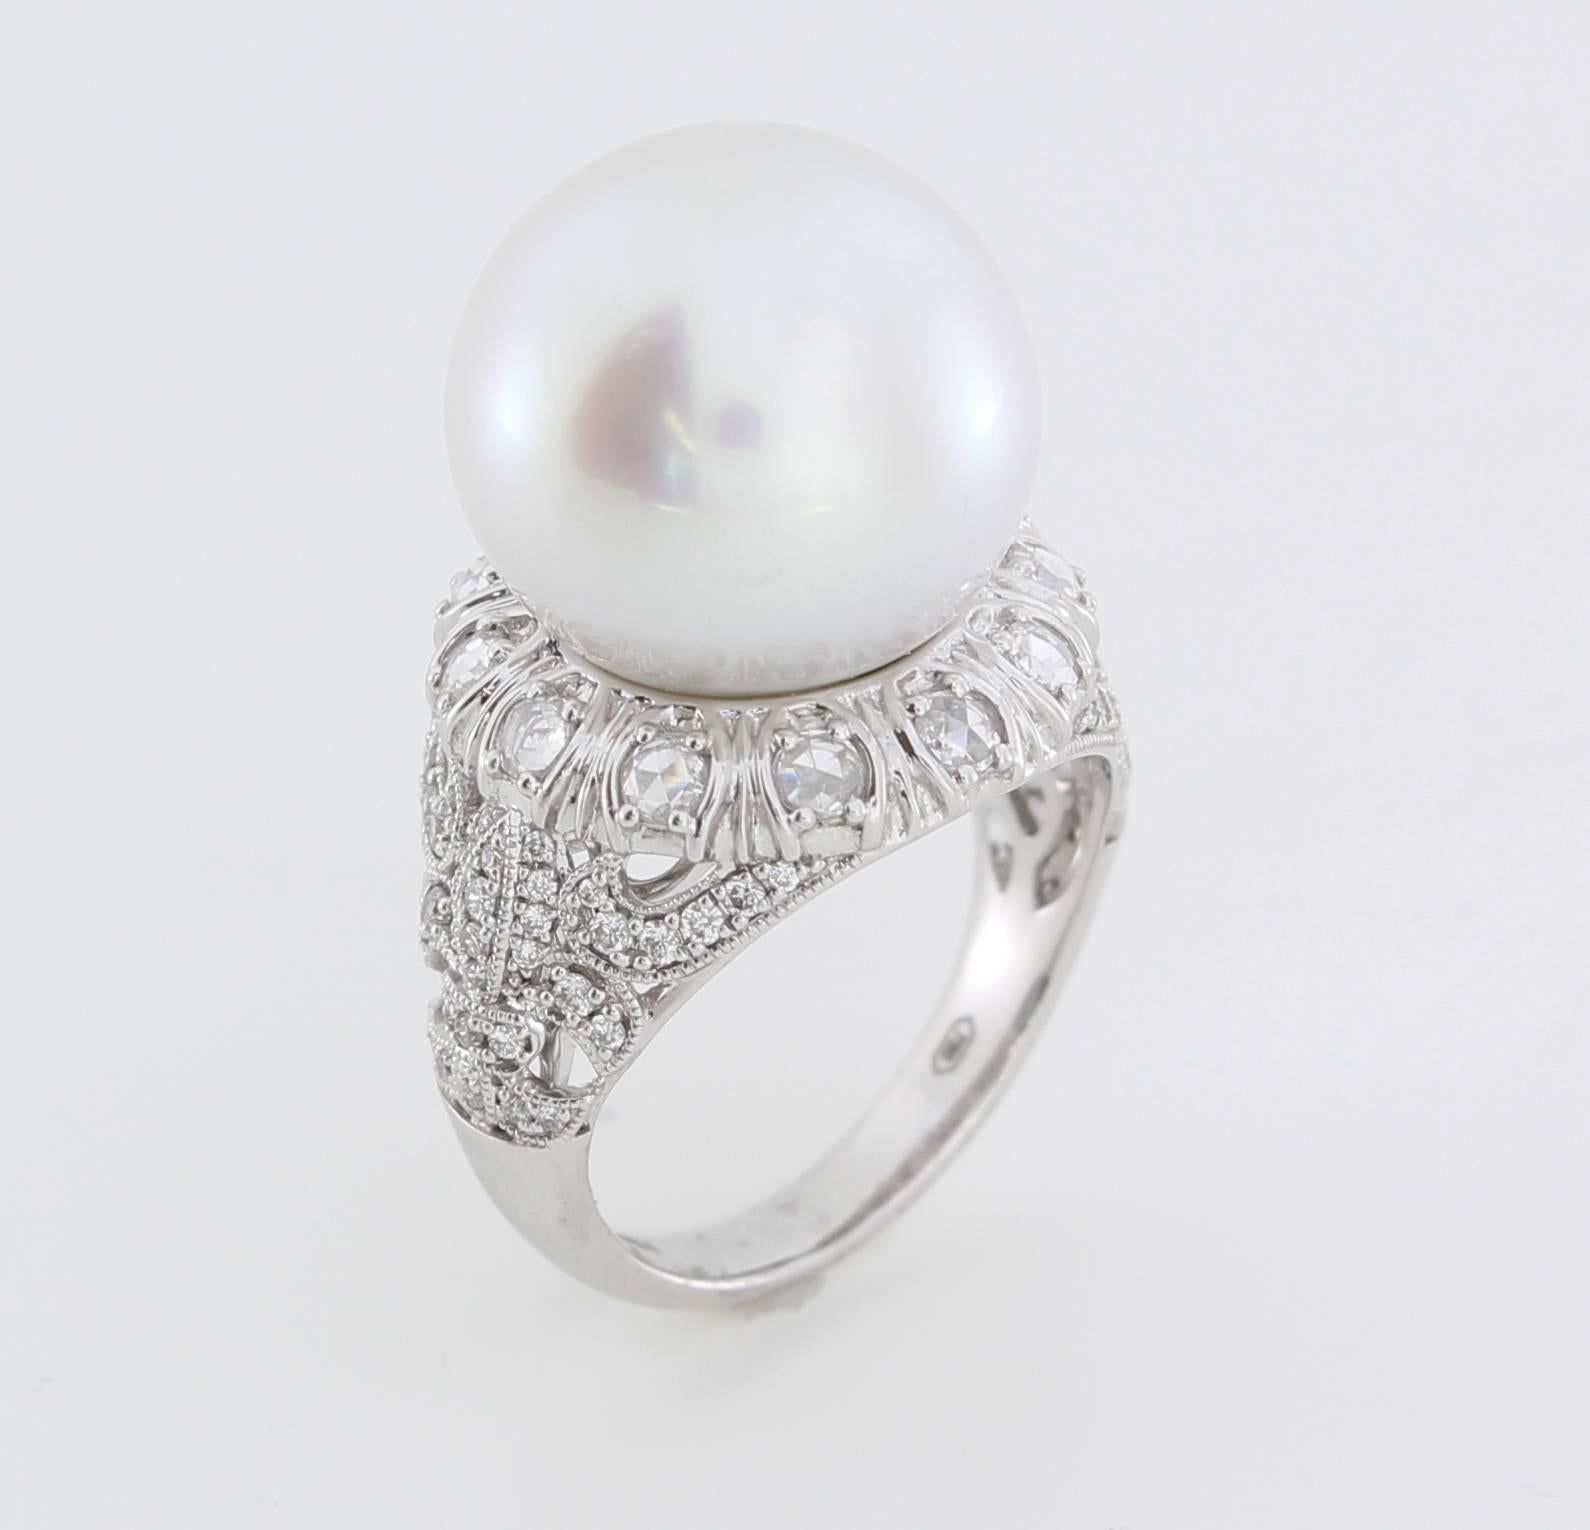 The Royal Ring is from the AUTORE Metropolitan Collection and is inspired by the Palace de Versailles in France. 
This piece is crafted in 18k White Gold with White Diamonds (H SI 0.725ct Brilliant Cut) and a 15mm White South Sea Pearl. 